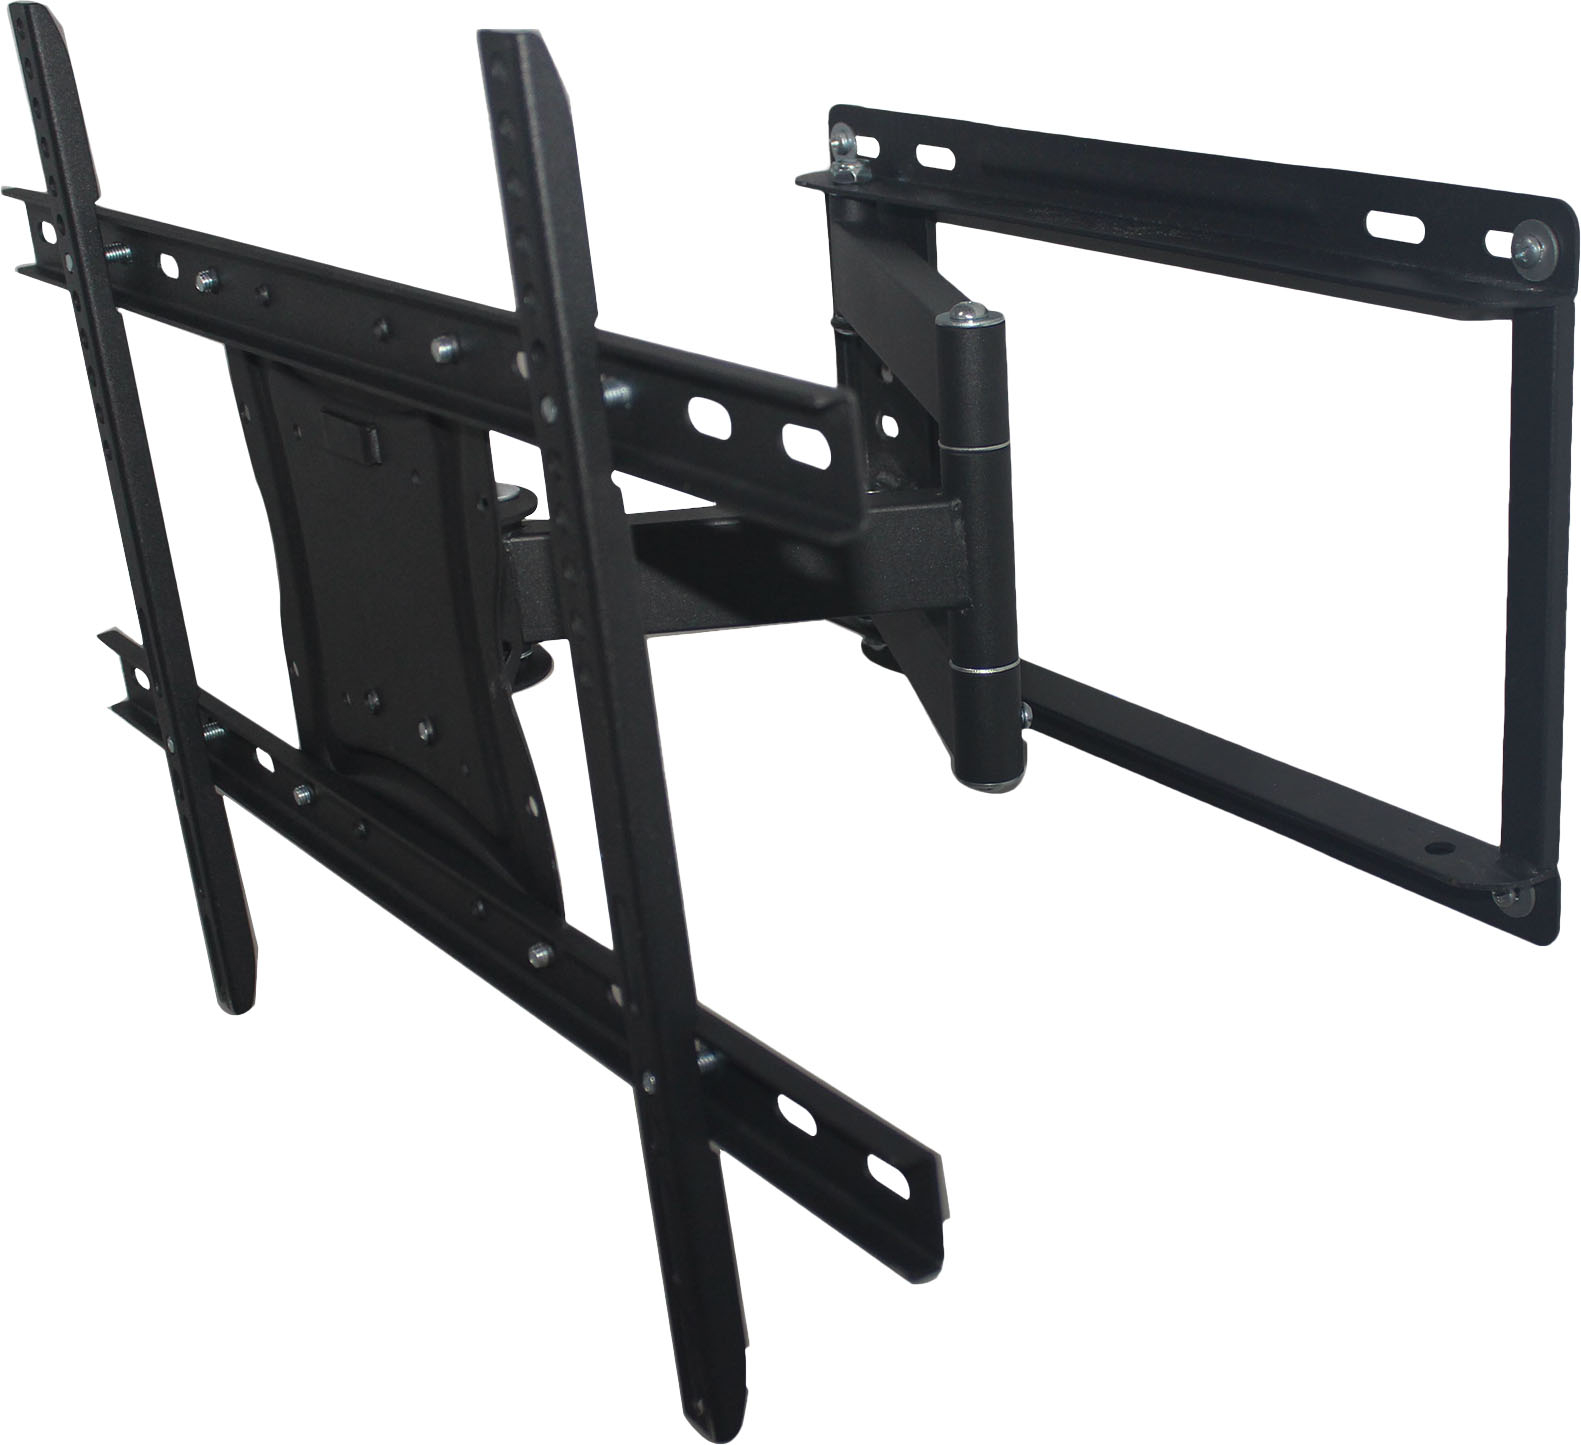 Angle View: Kanto - Full-Motion TV Wall Mount for Most 30" - 70" TVs - Extends 27.6" - Black